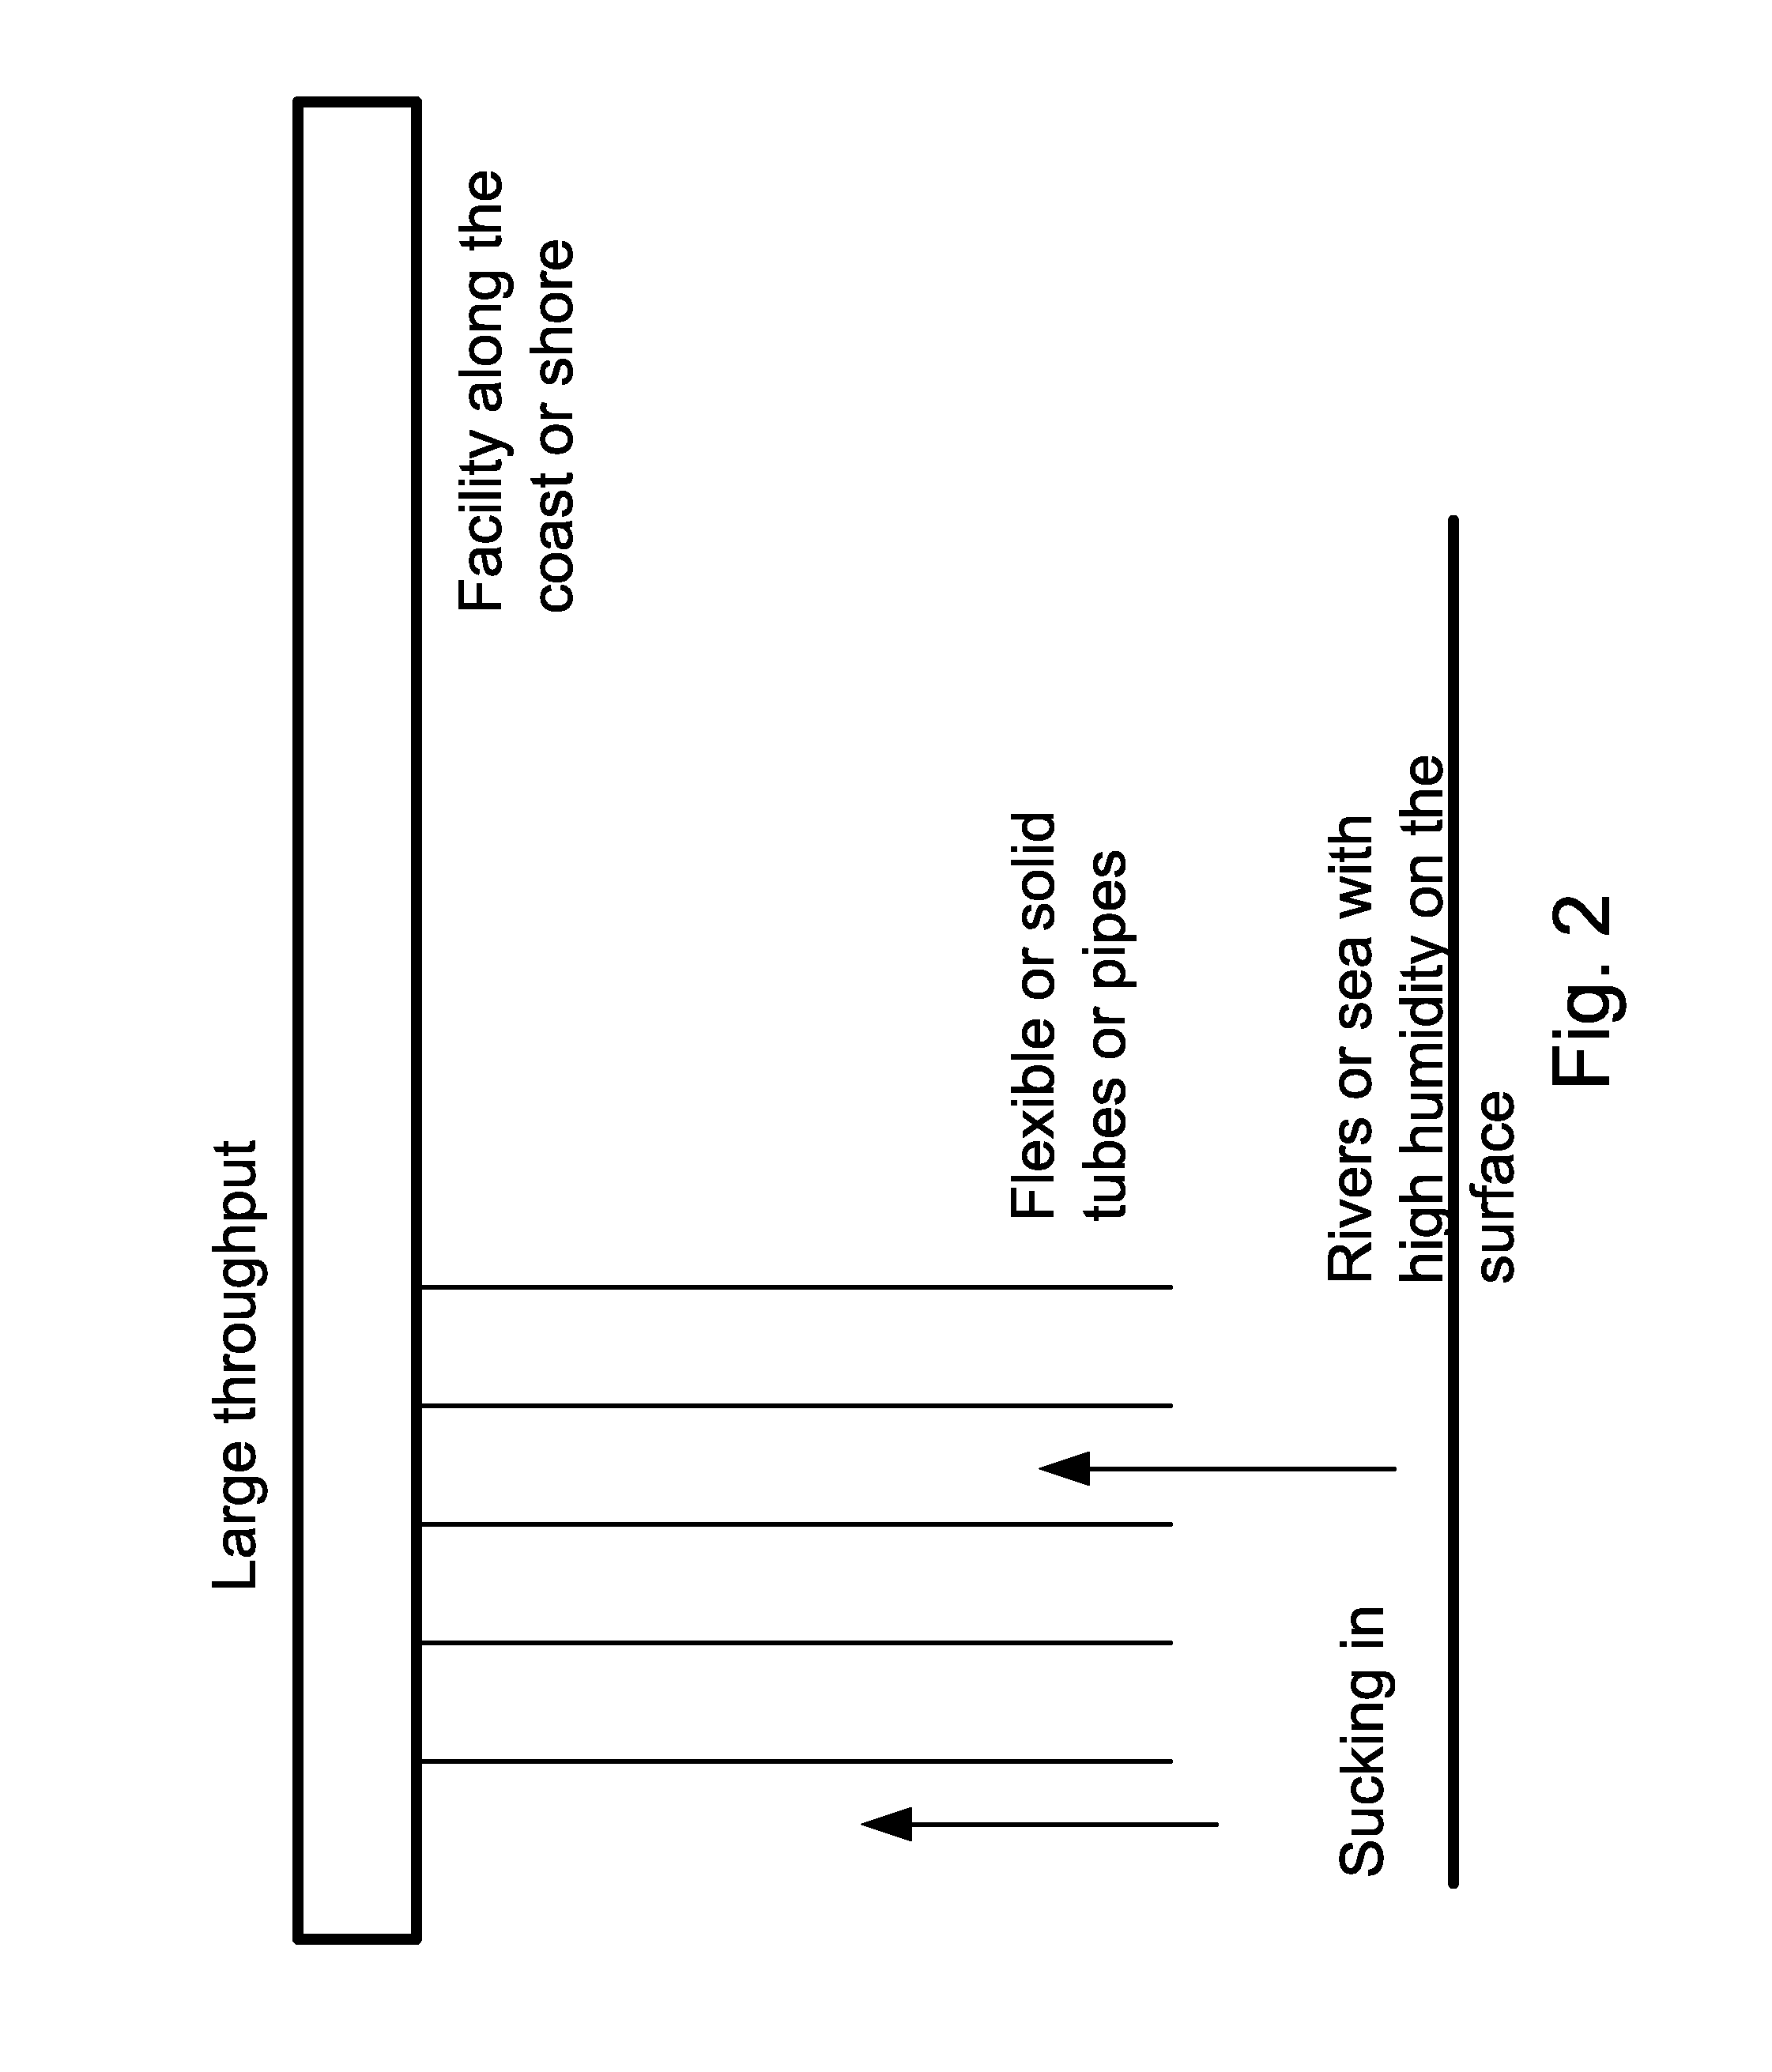 Method and system for water extraction using a floater station